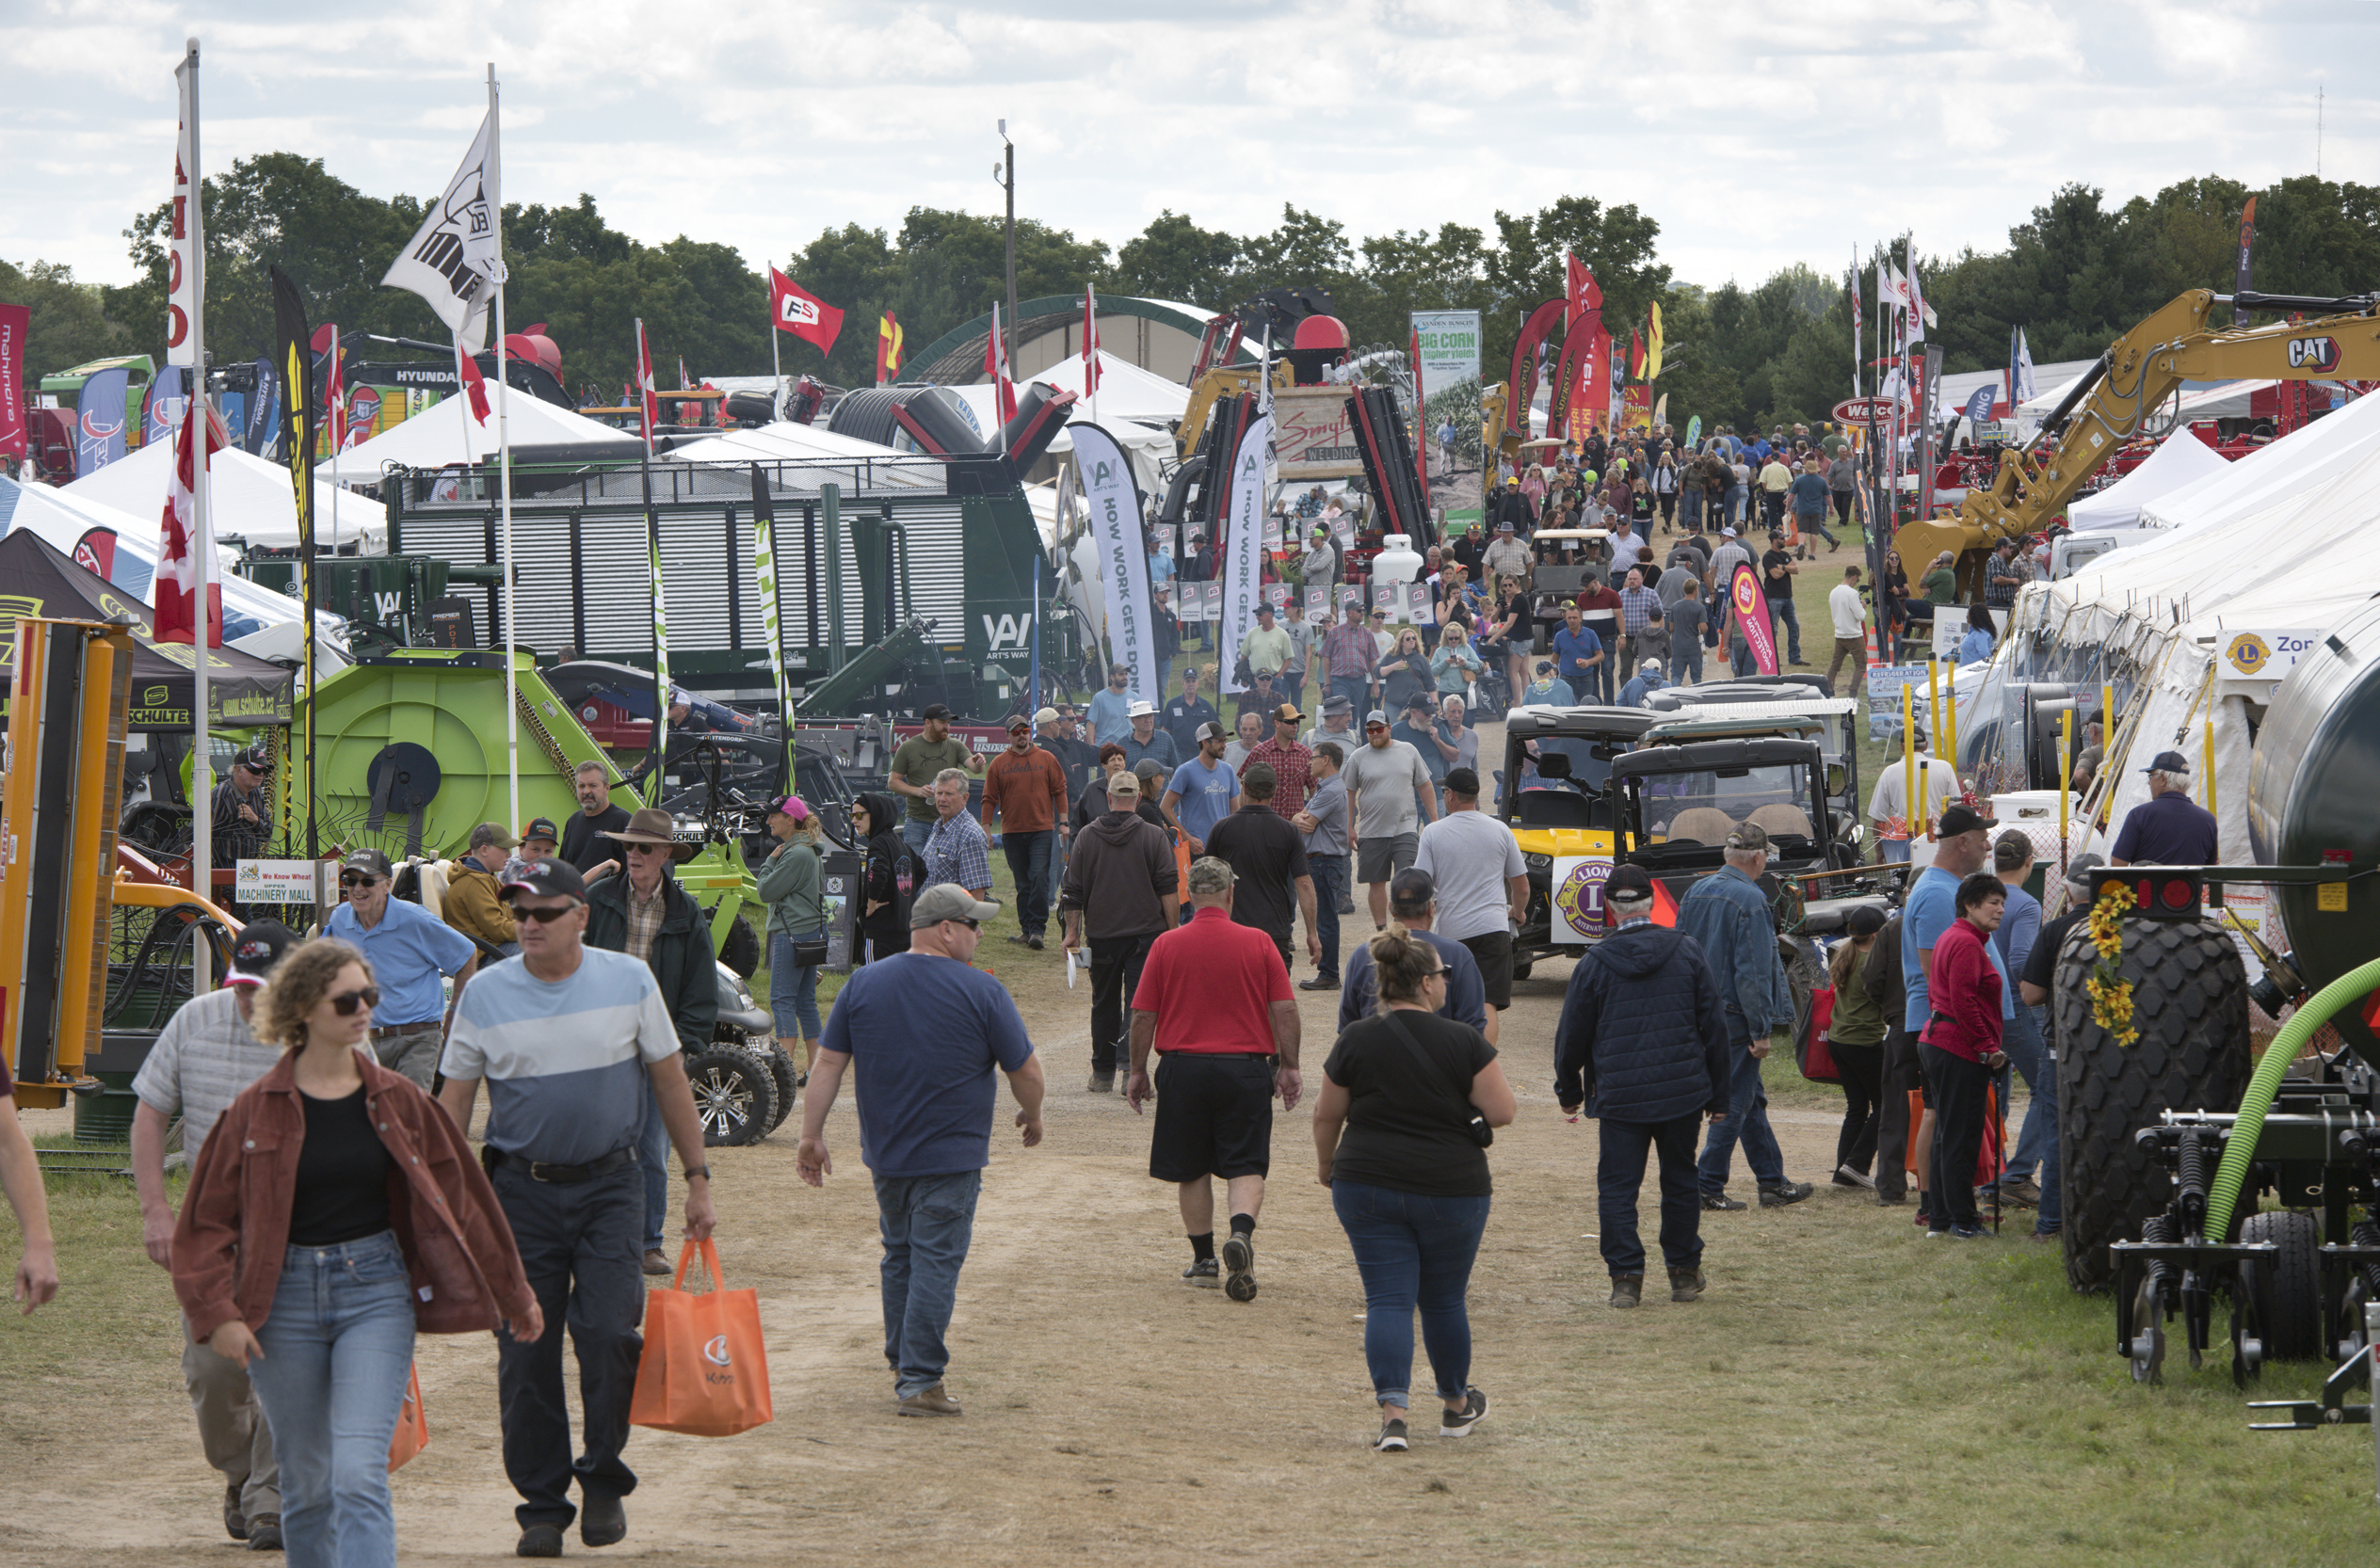 Ag innovation was on full display once again at Canada’s Outdoor Farm Show in Woodstock, Ontario